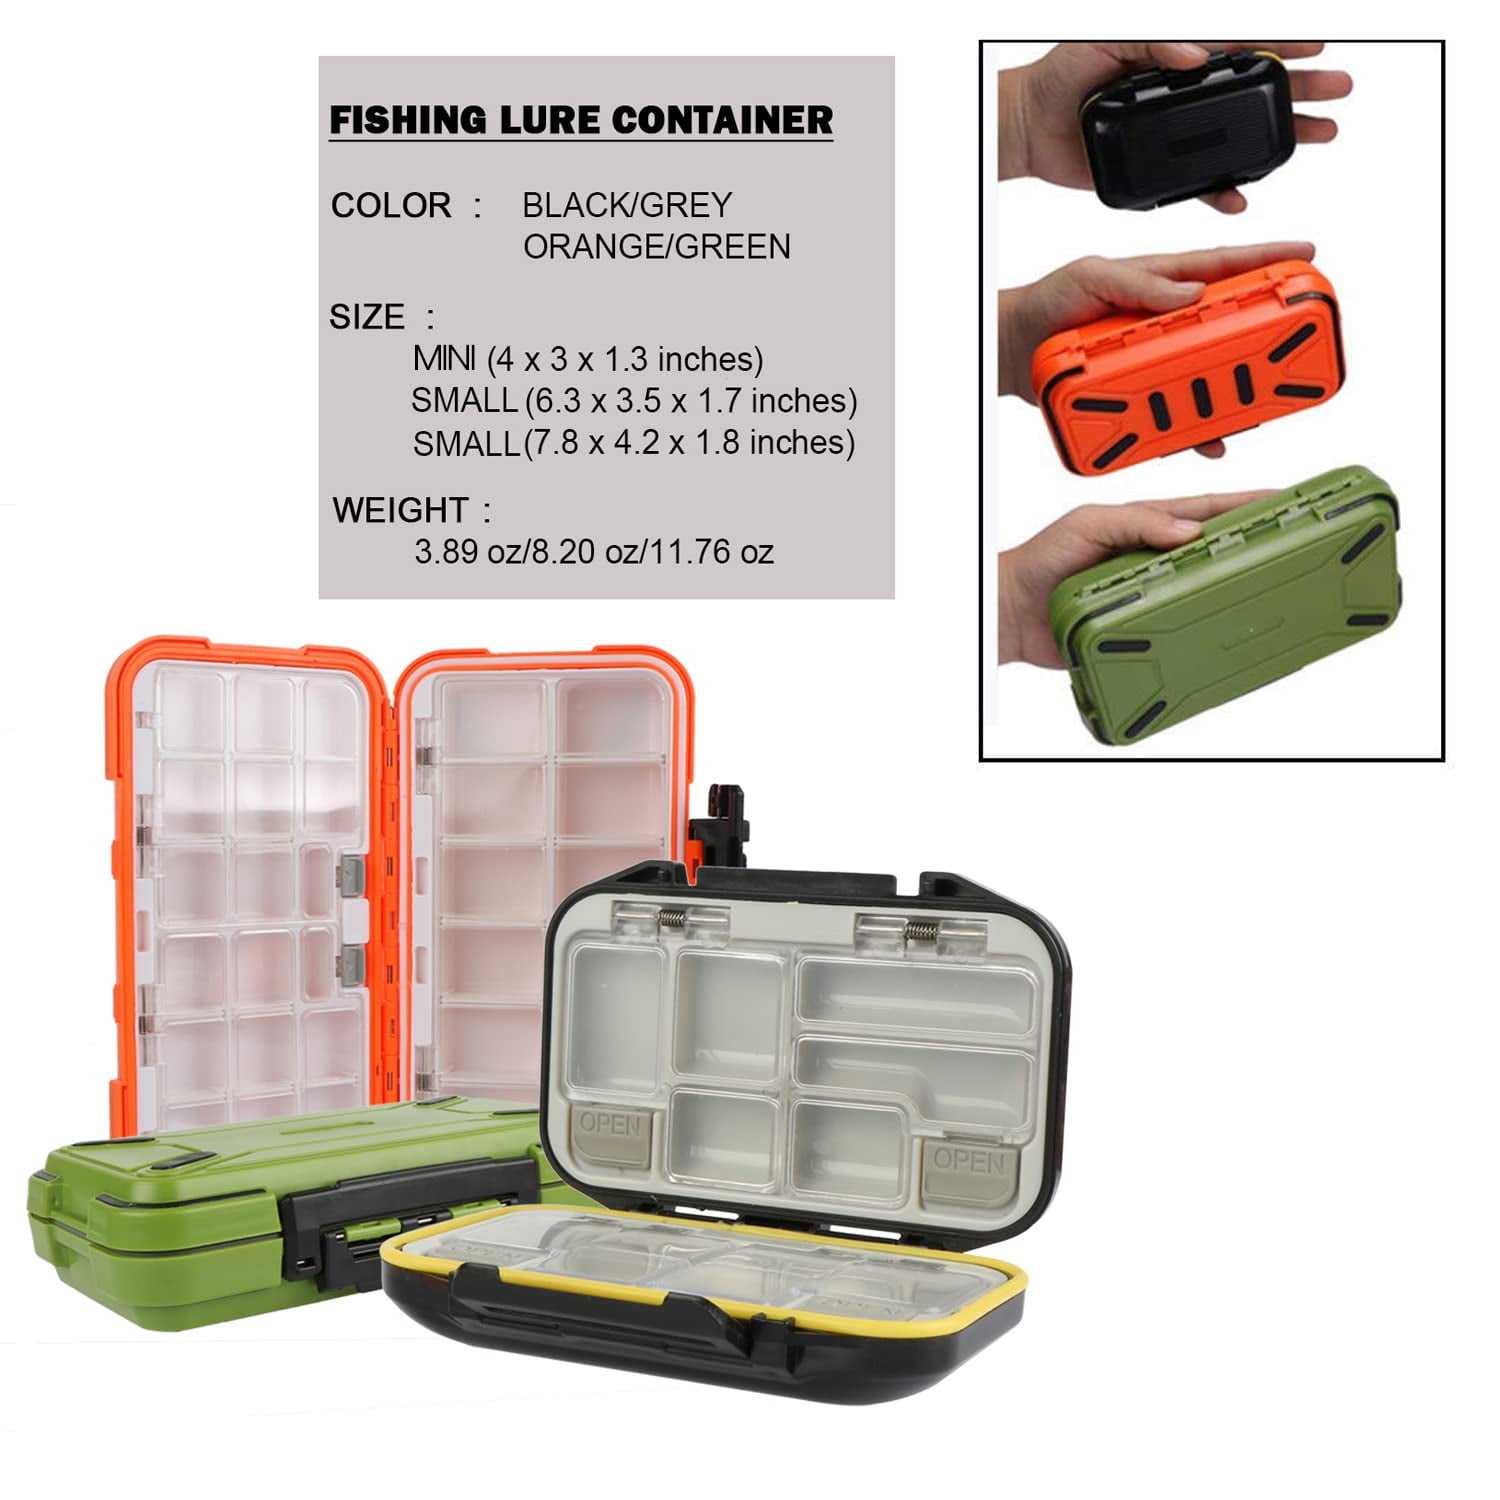 Goture Waterproof Fishing Lure Boxes, Small Tackle Boxes for Fishing,  Organizer Box, Tool Box, Box Organizer - Black Tackle Trays SMALL 7.71'' X